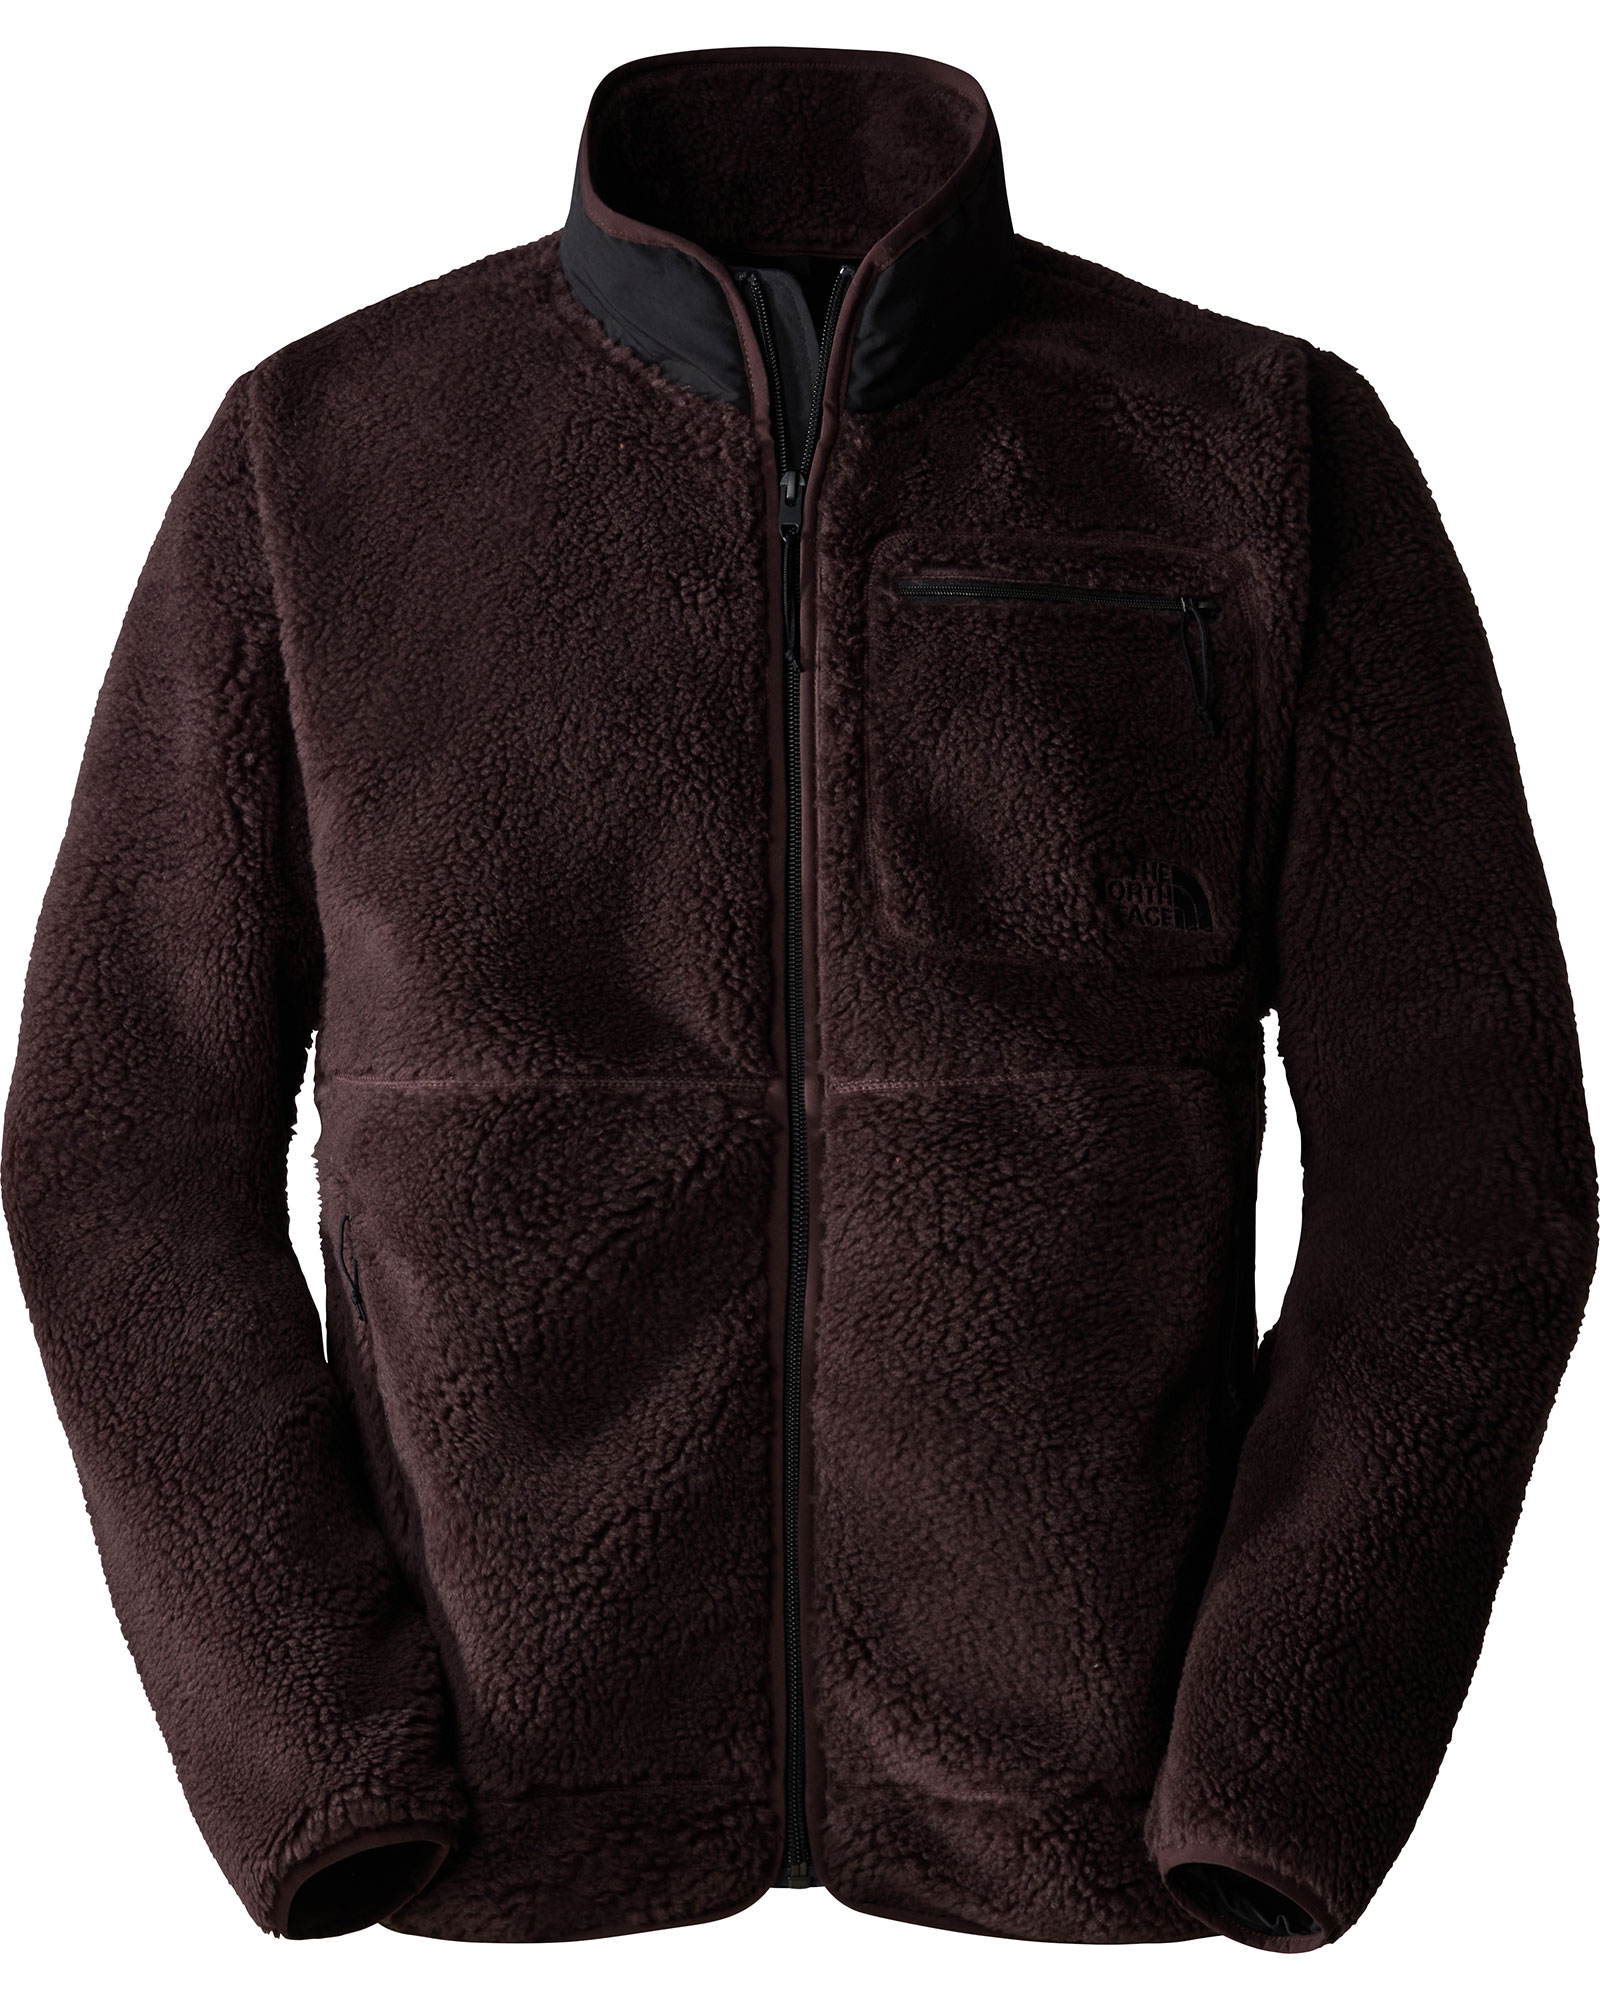 The North Face Men’s Extreme Pile Full Zip Jacket - Coal Brown S